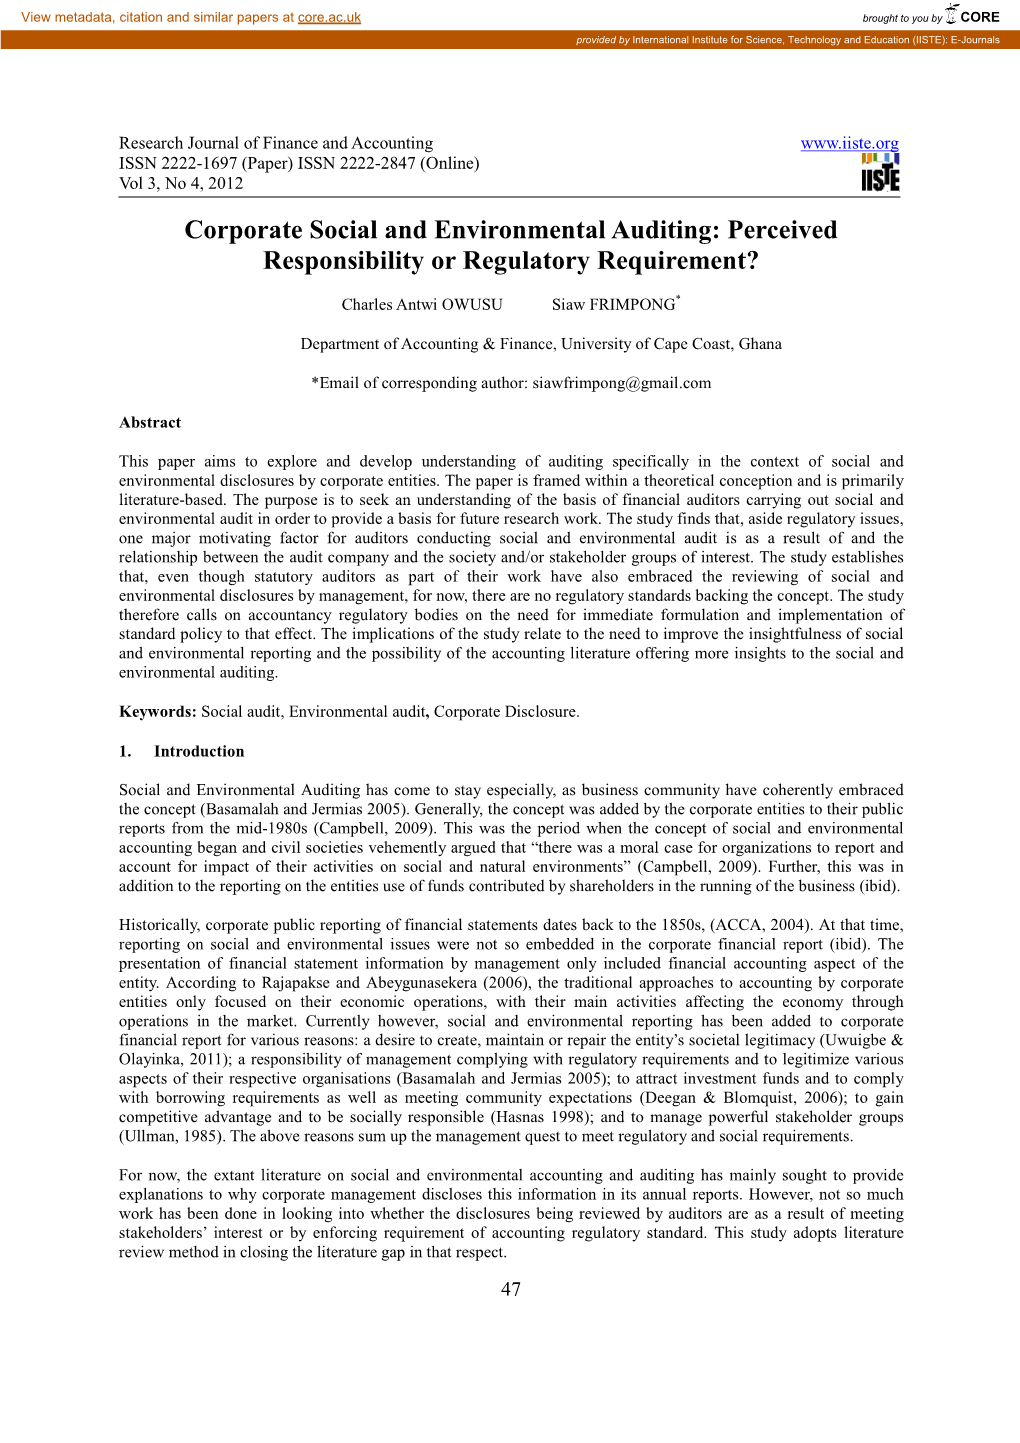 Corporate Social and Environmental Auditing: Perceived Responsibility Or Regulatory Requirement?